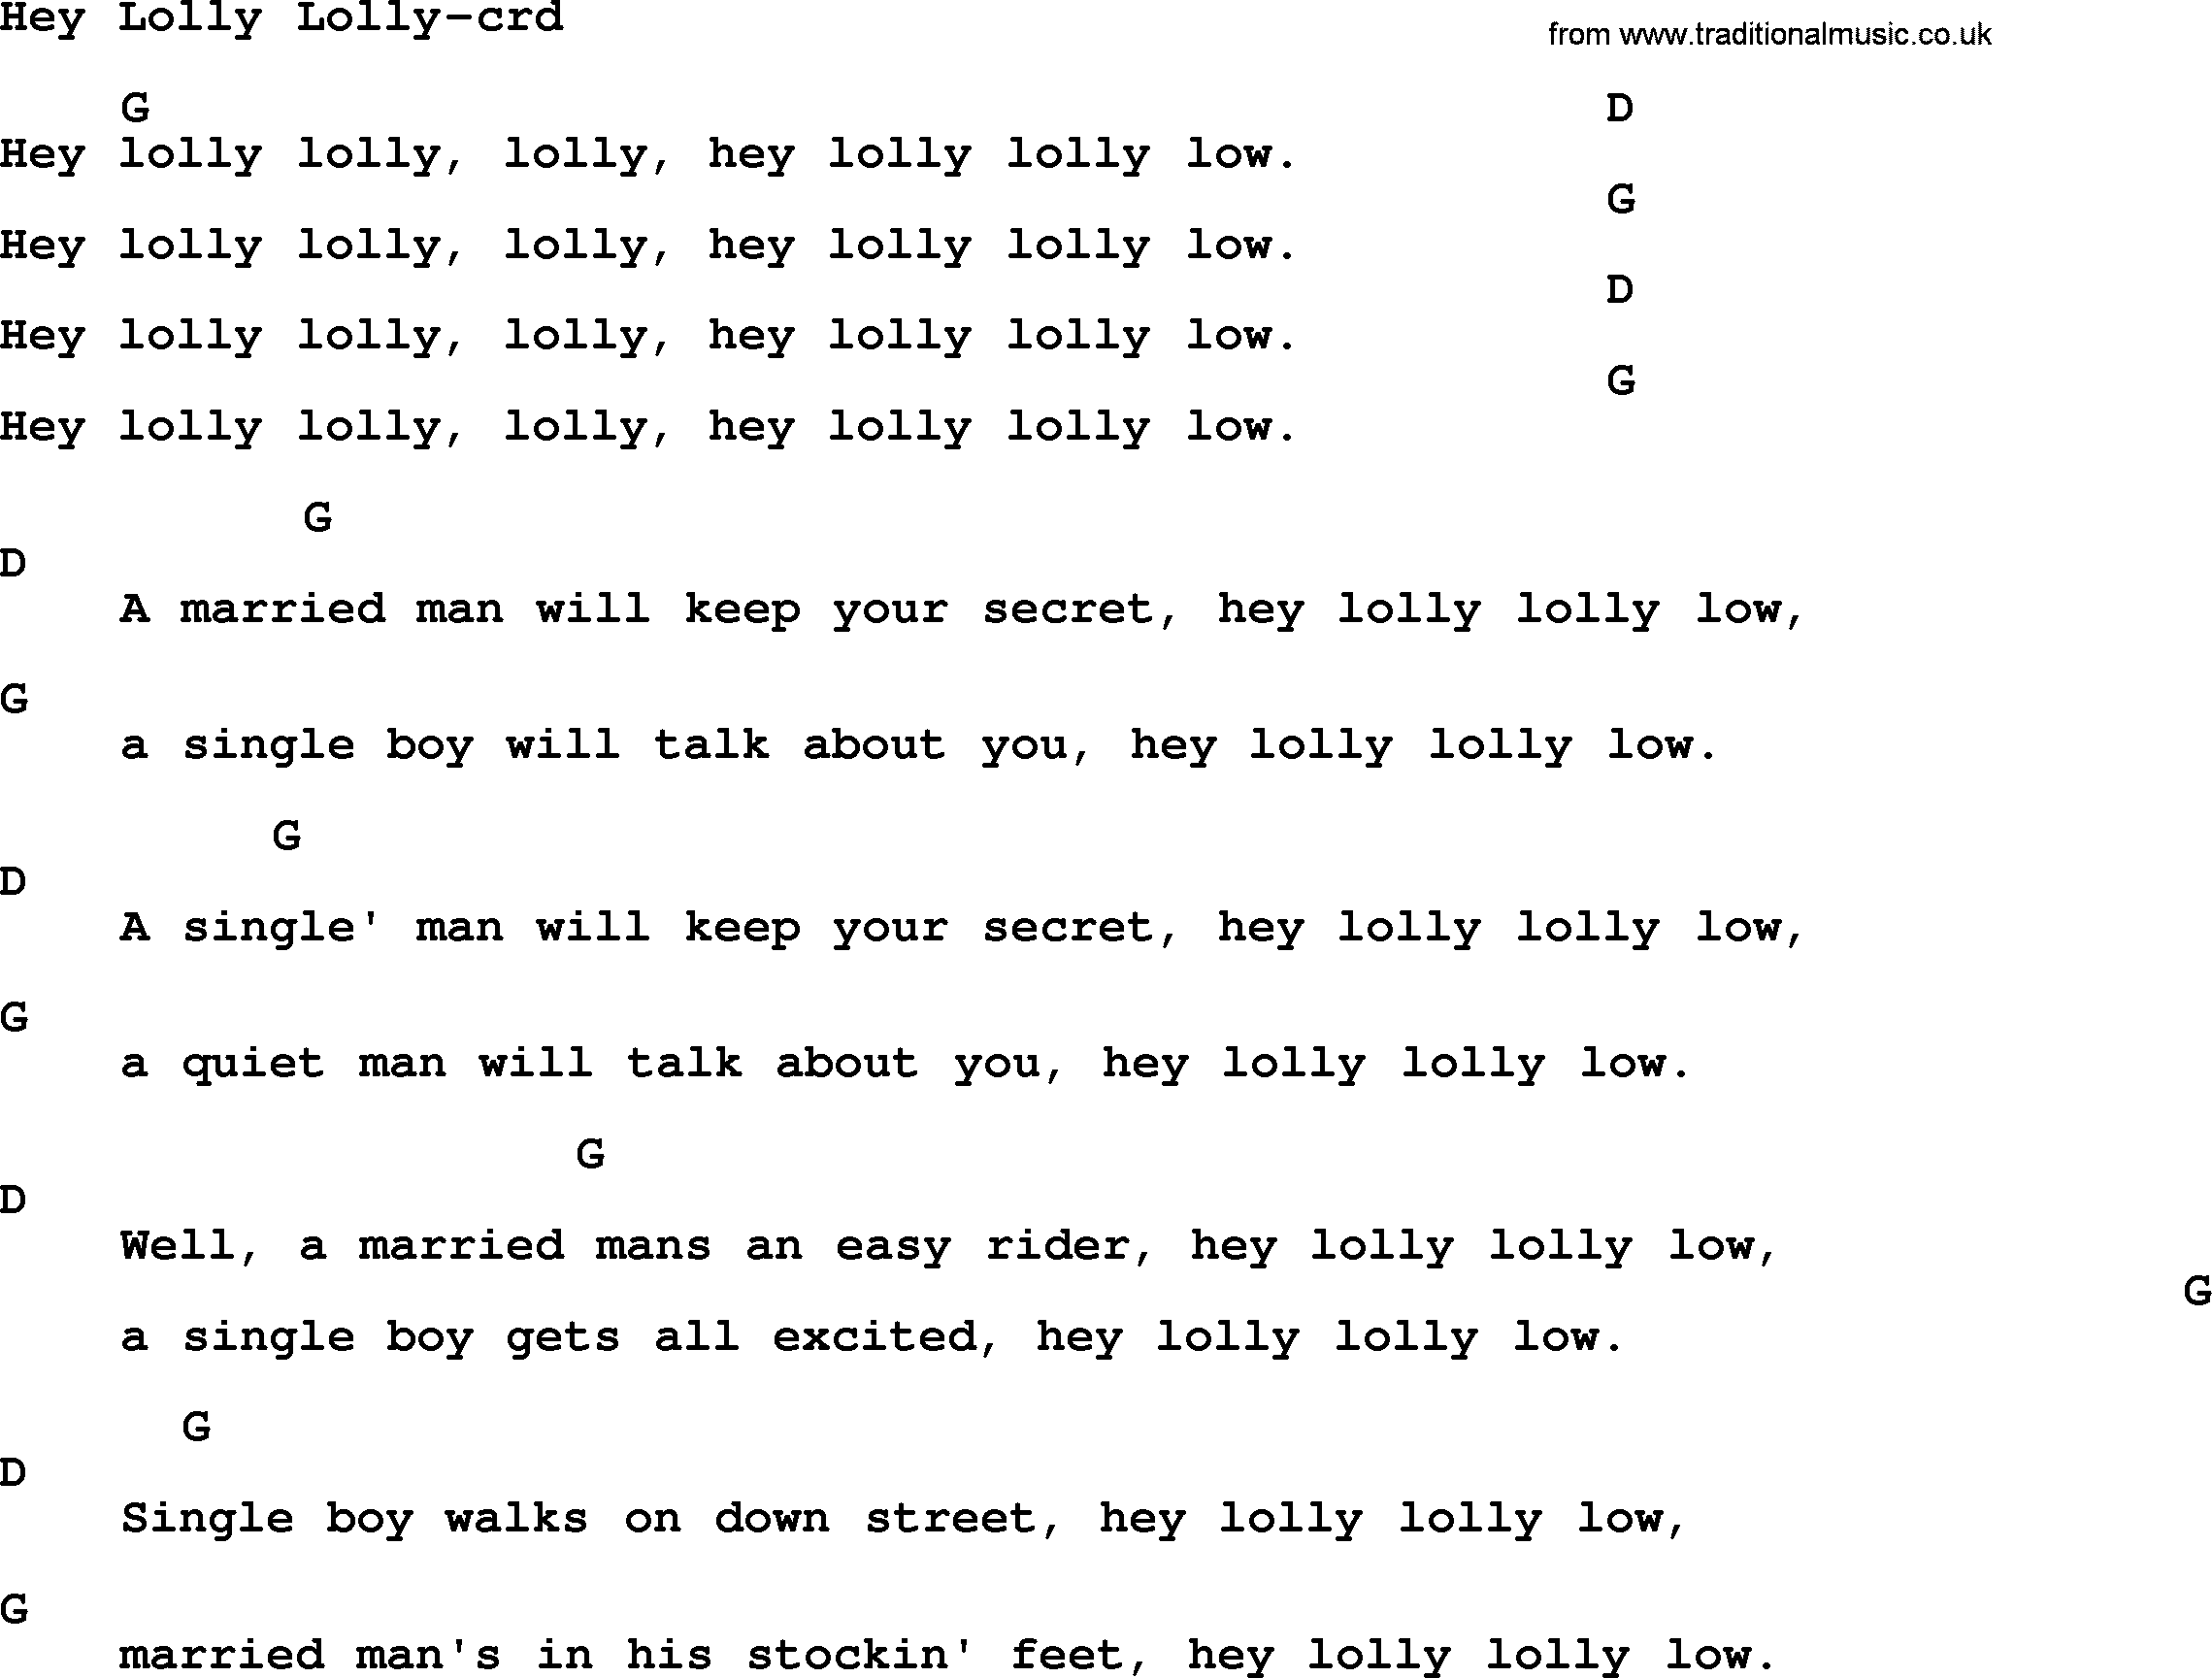 Woody Guthrie song Hey Lolly Lolly lyrics and chords